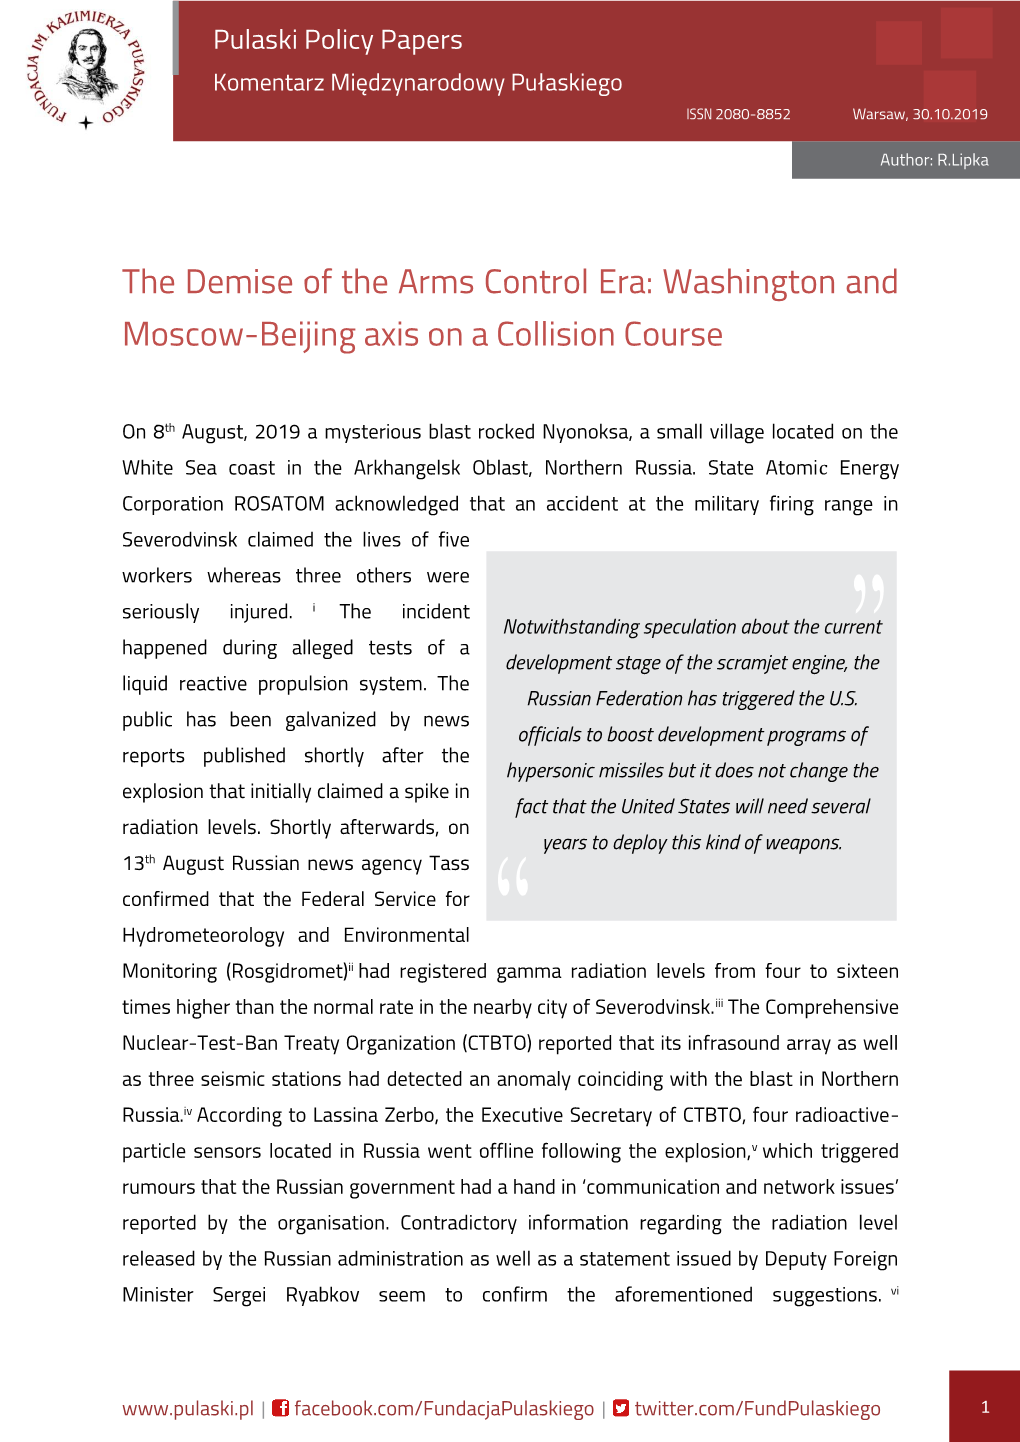 The Demise of the Arms Control Era: Washington and Moscow-Beijing Axis on a Collision Course